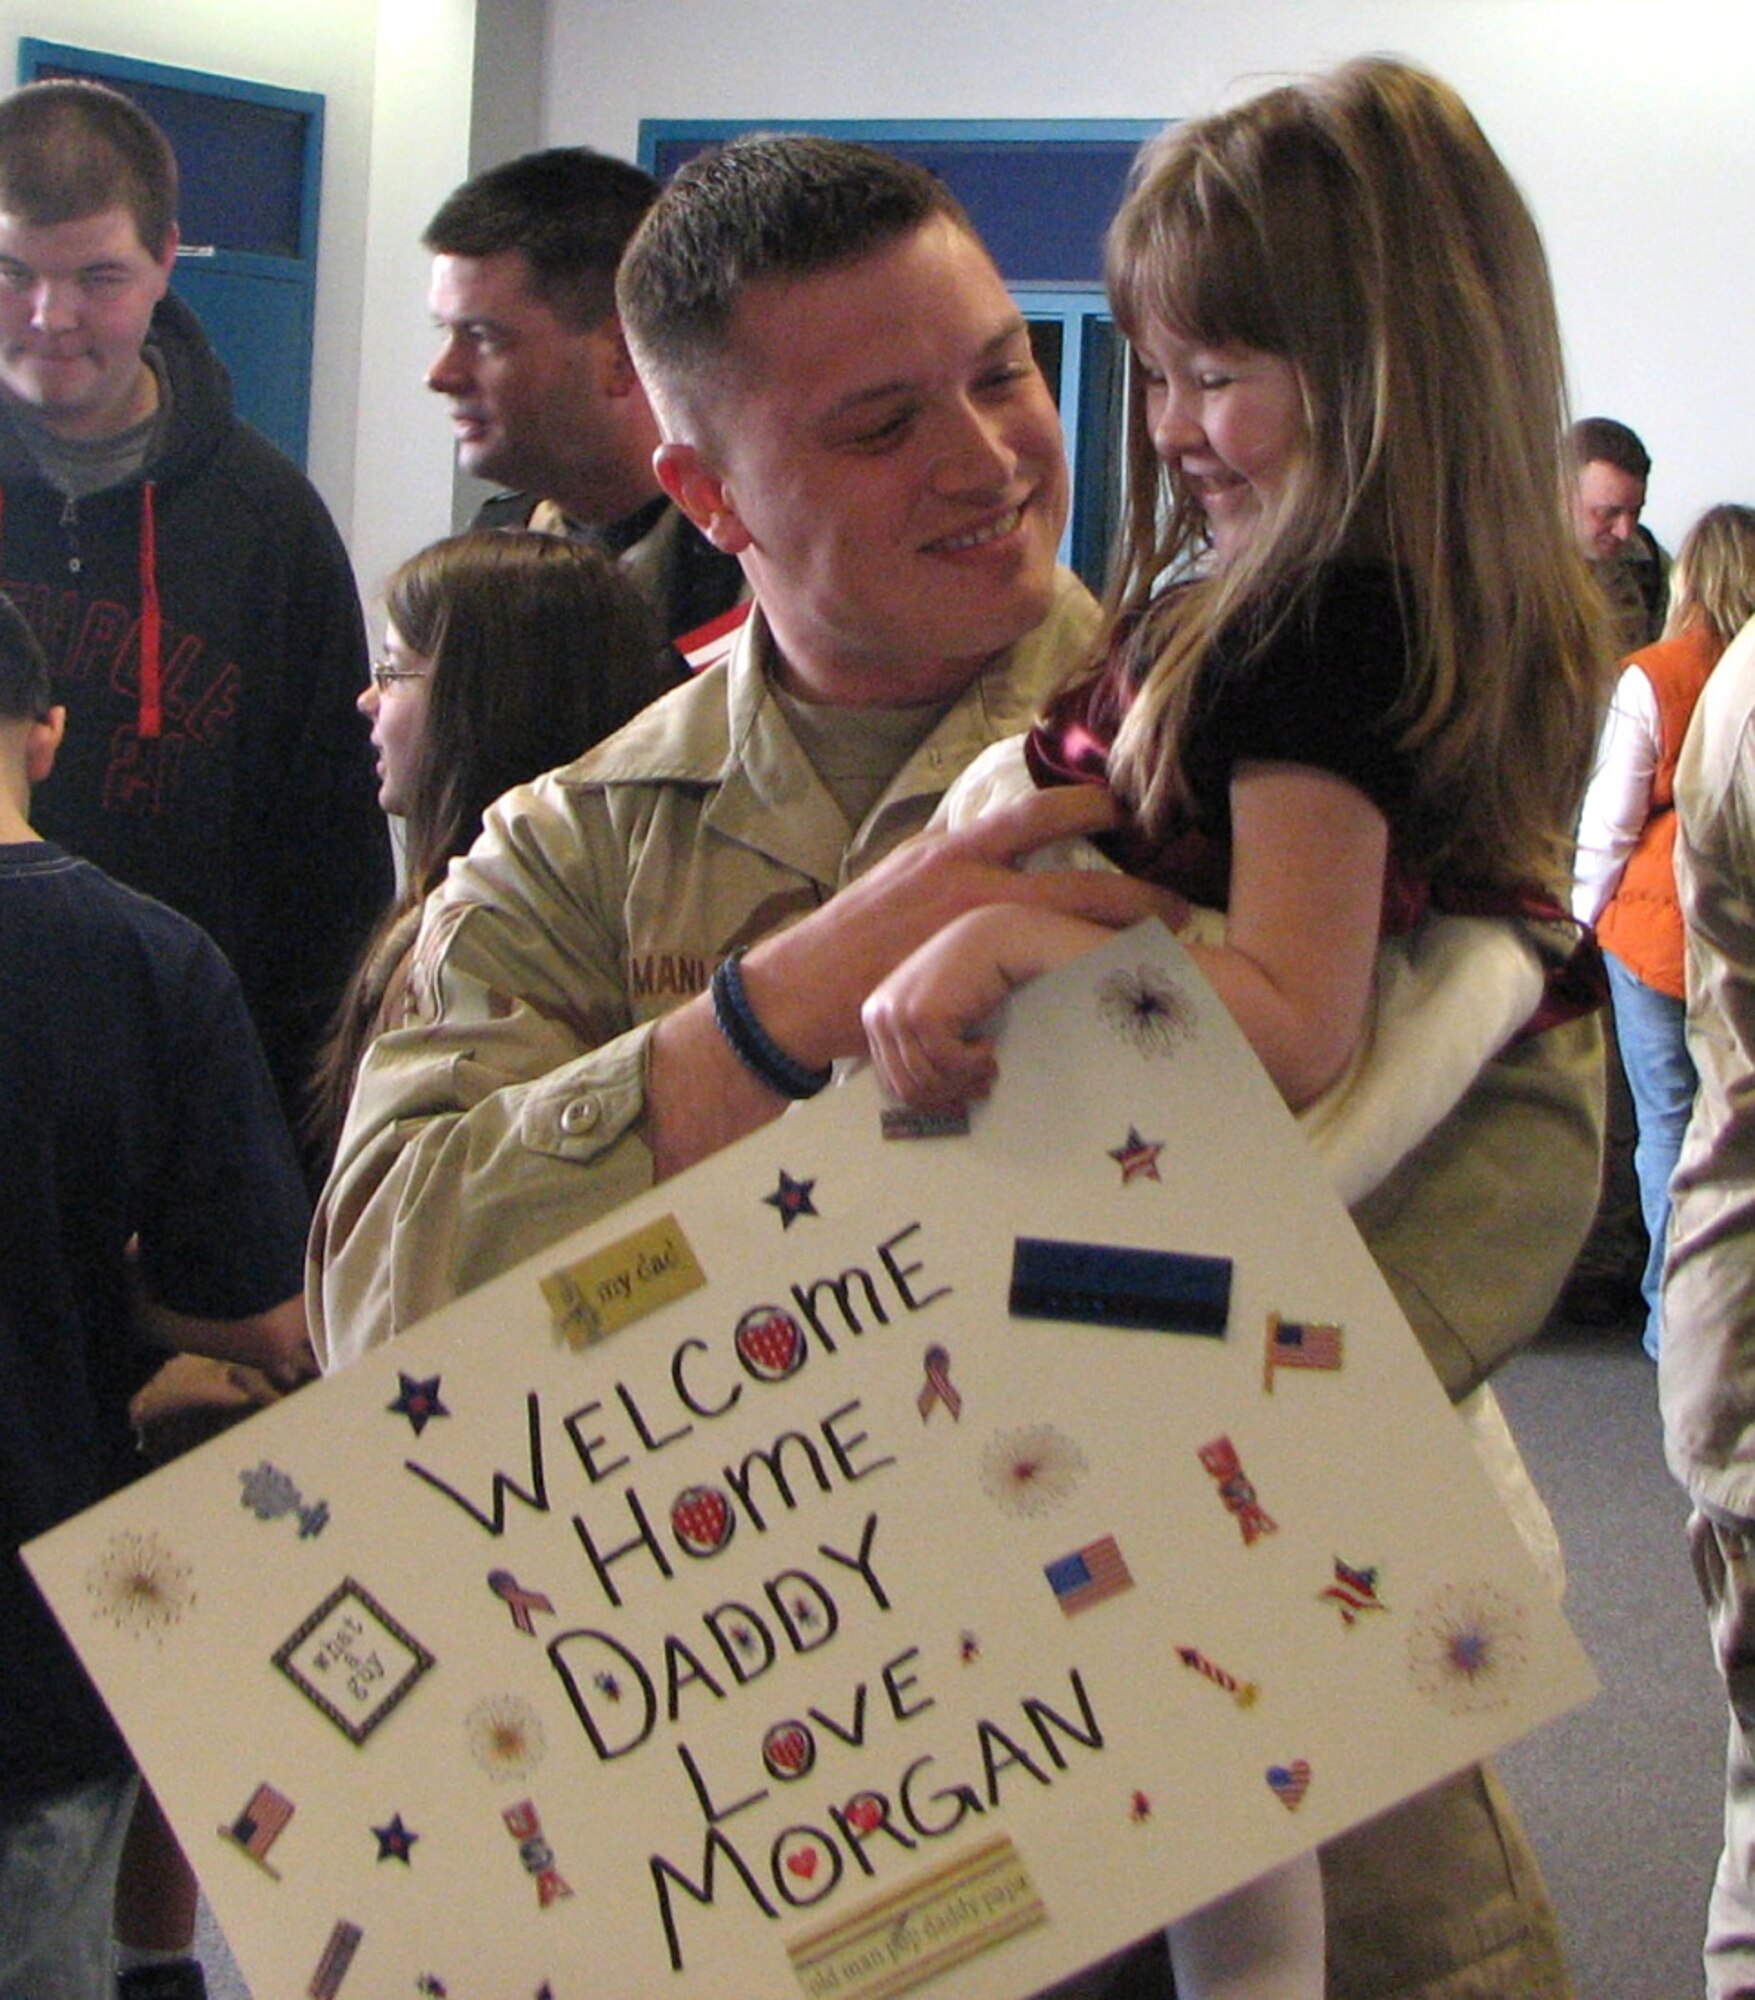 (Photo by Staff Sgt. CeeJay Garner) Staff Sgt. Stephen Manley, a Northeast Air Defense Sector Security Force member returning from deployment, smiles at his daughter Morgan at the Syracuse International Airport March 14. In the unit's largest deployment ever, nearly 30 security force members deployed on a six-month tour to Manas Air Base, located in Kyrgyzstan, in September 2007.